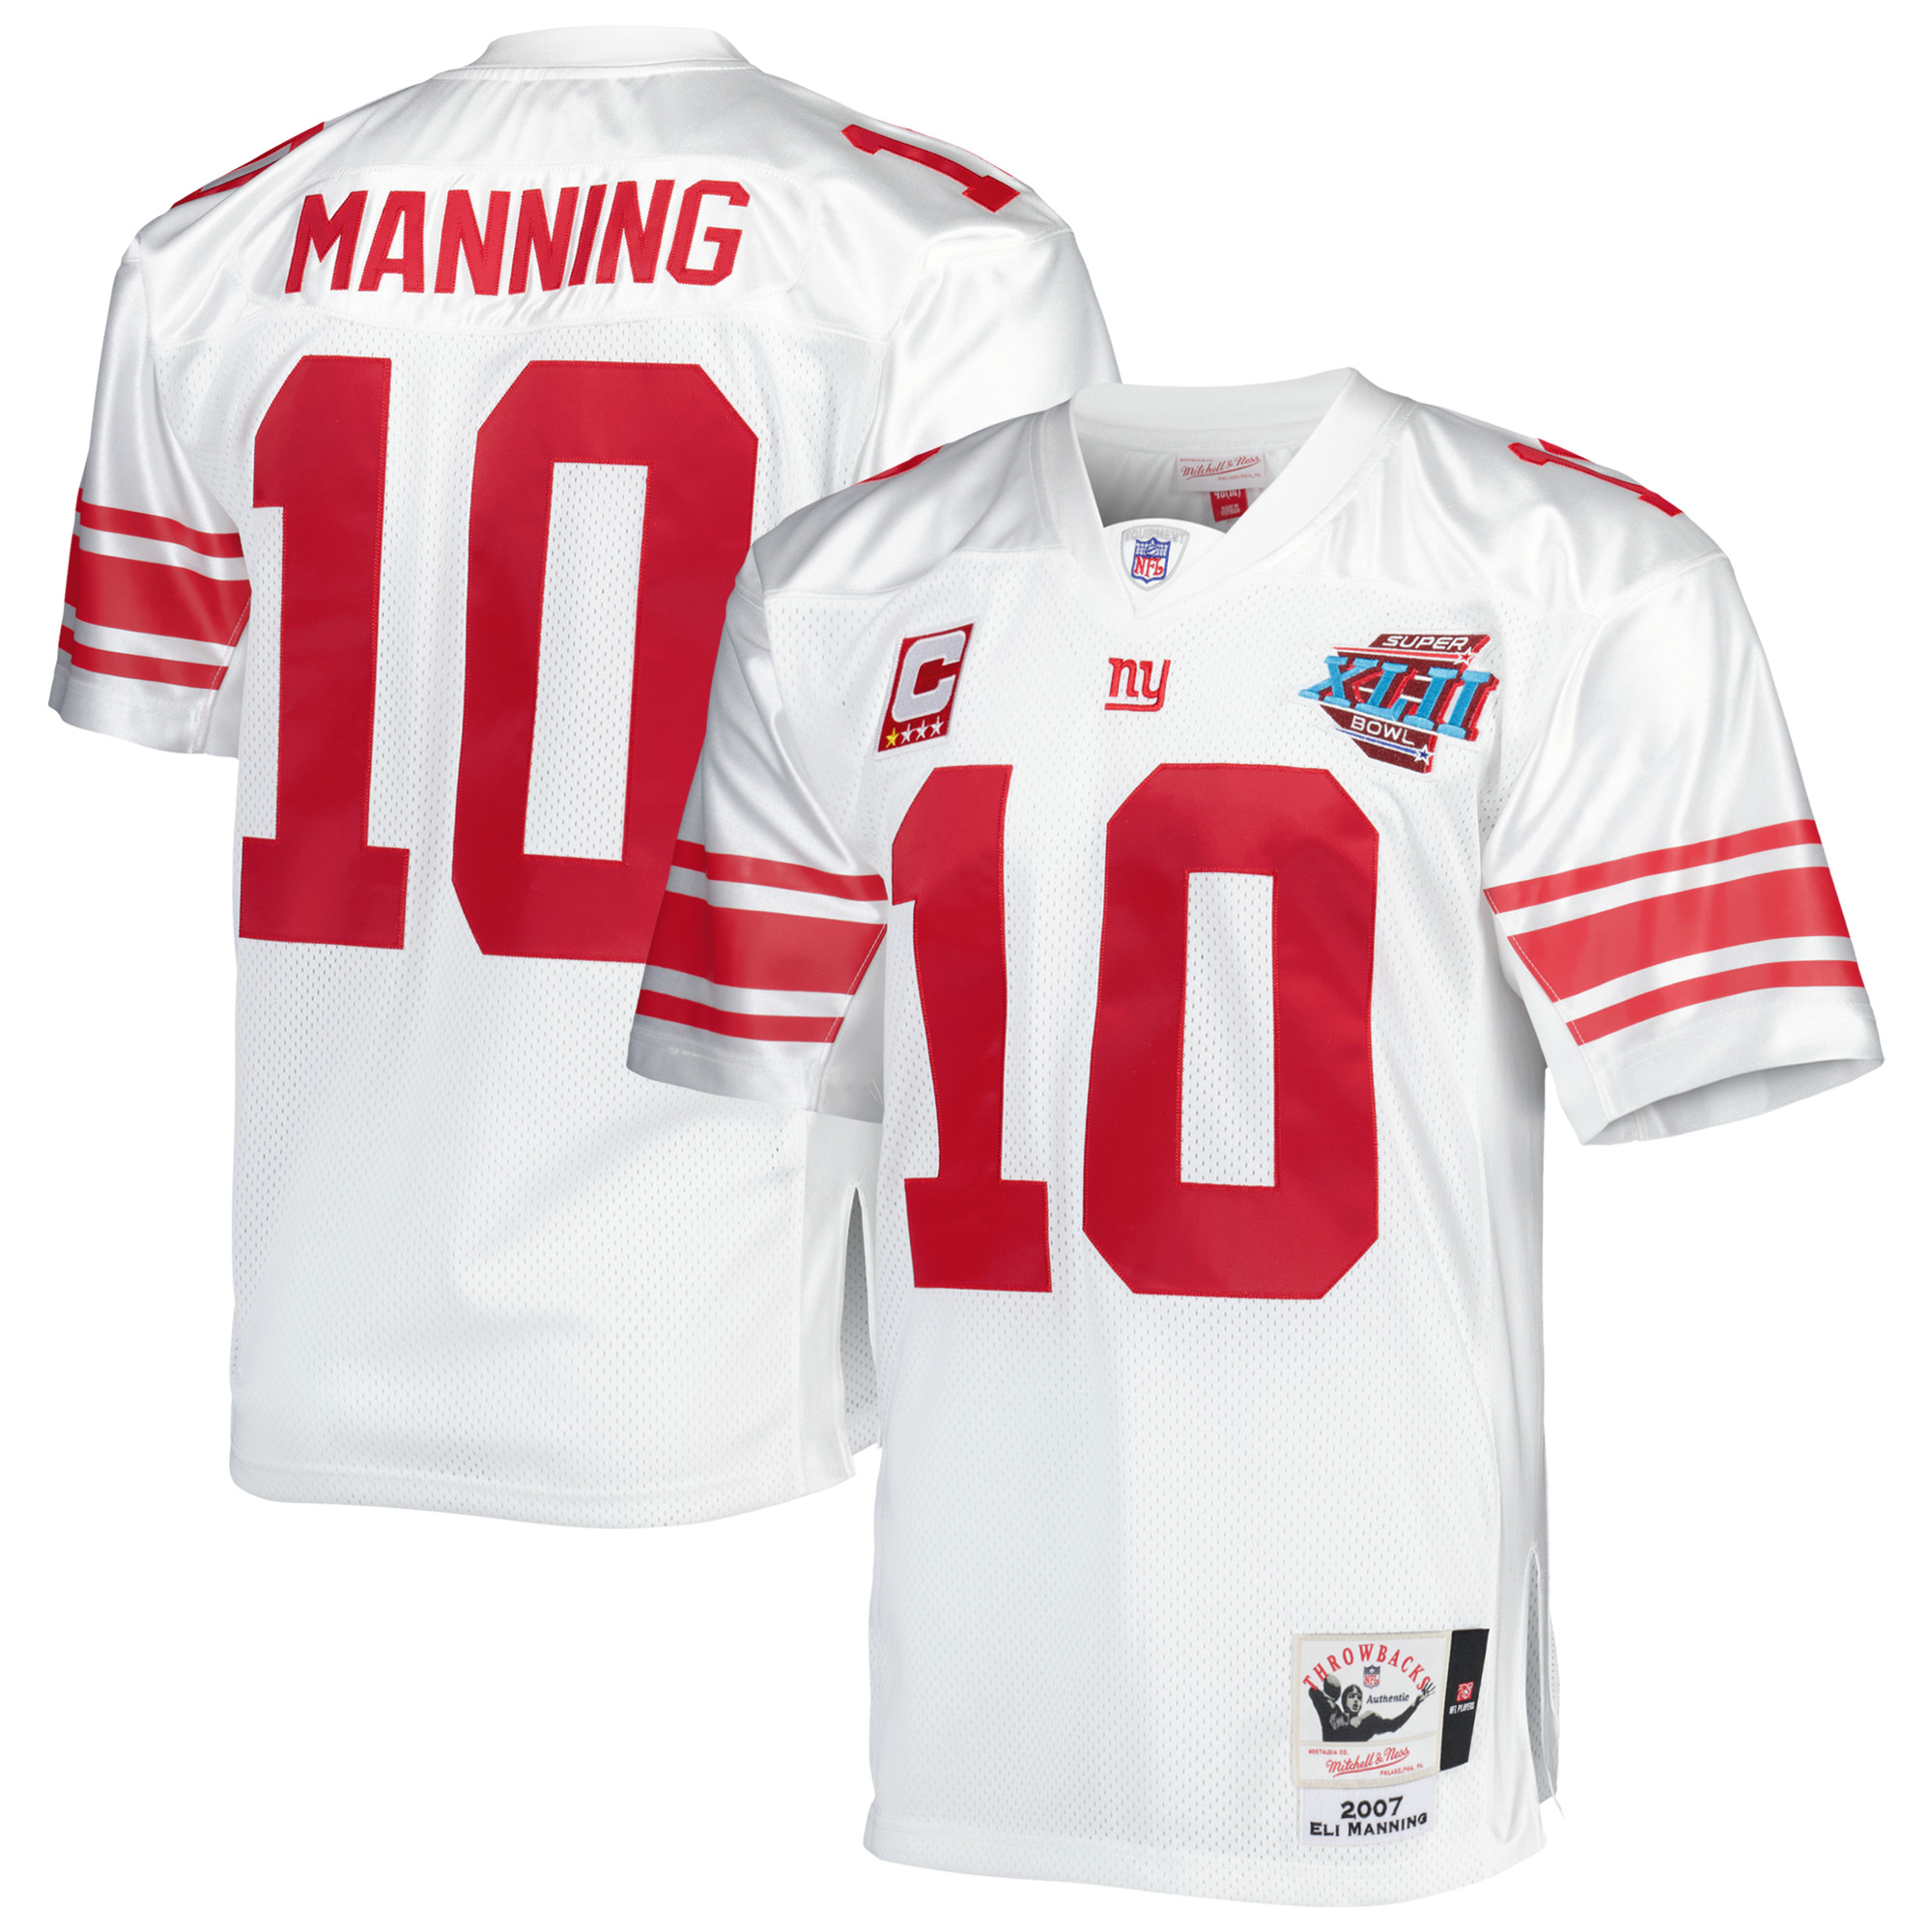 Men's New York Giants Jerseys White Eli Manning Super Bowl XLII Authentic Throwback Retired Player Style